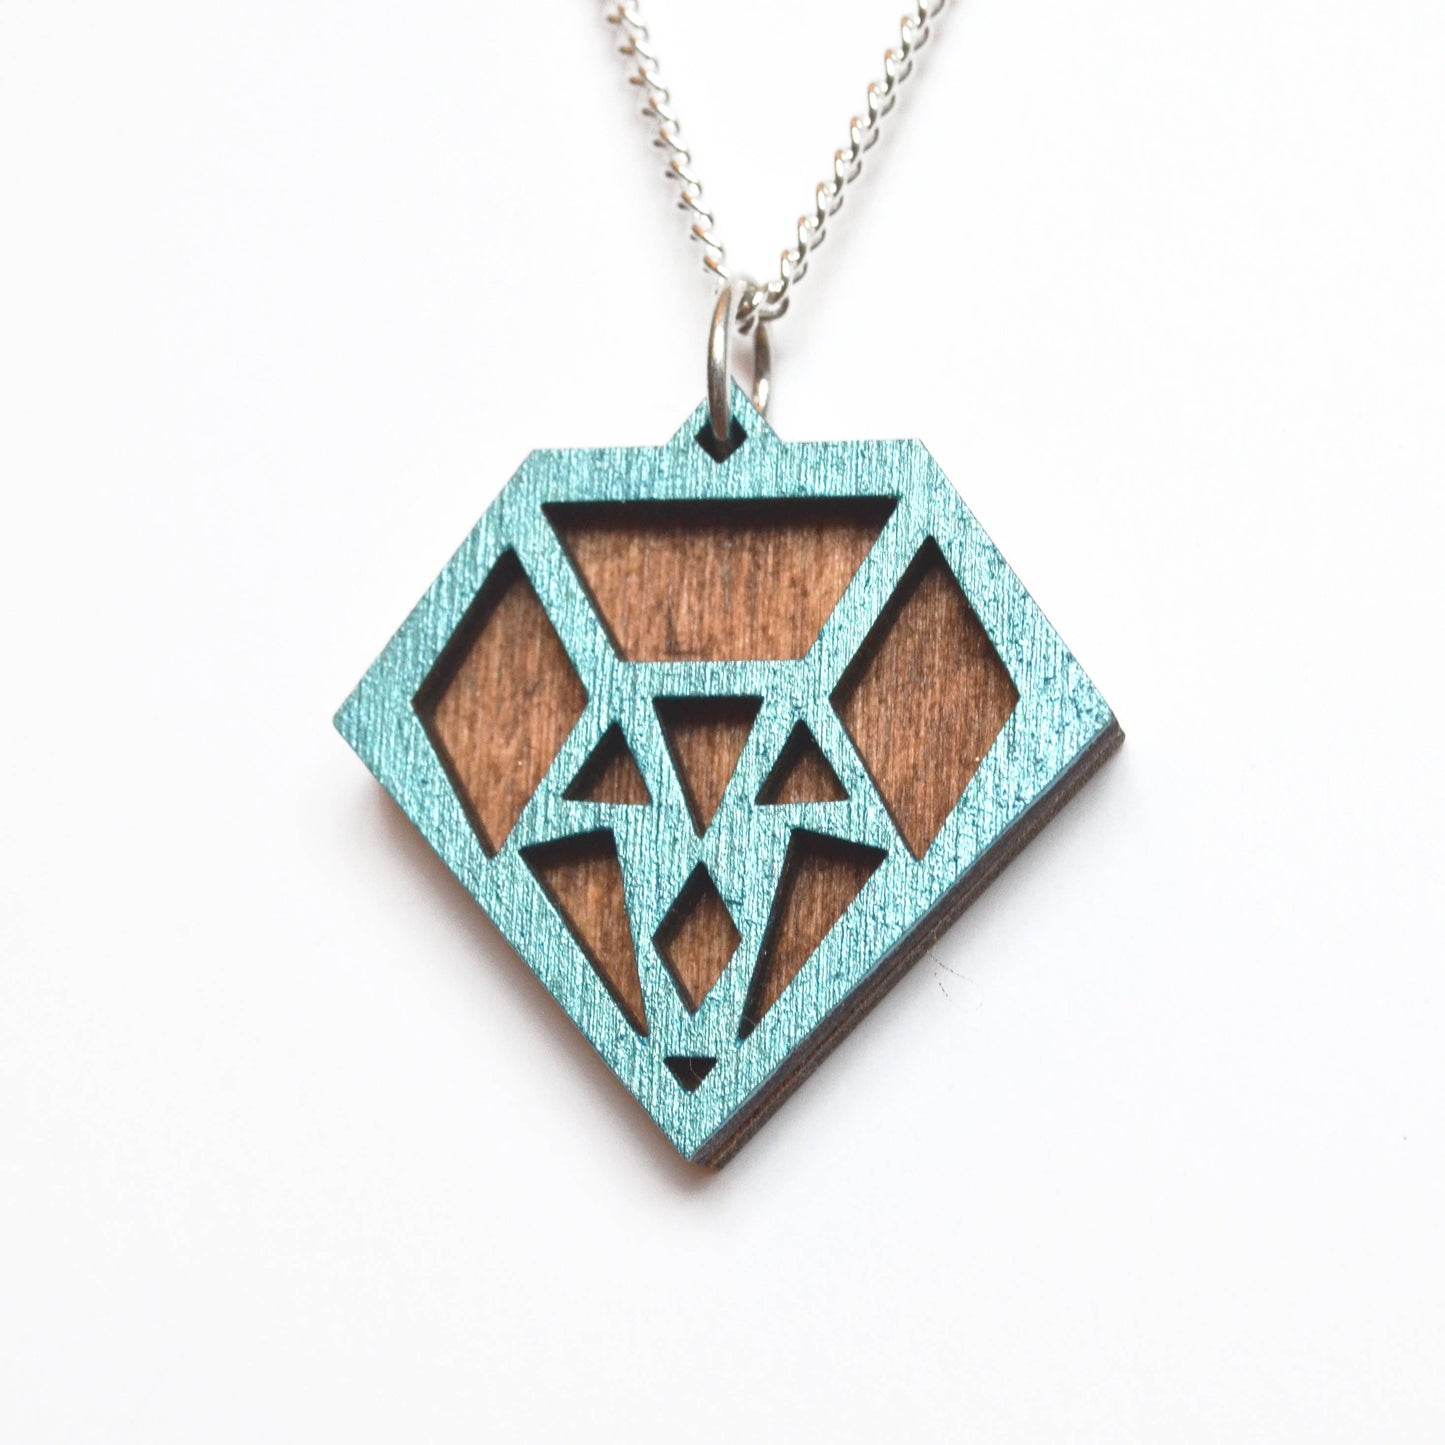 Hand Painted Wooden Diamond Art Deco Geometric Laser Cut Necklace - Small Style Design 2